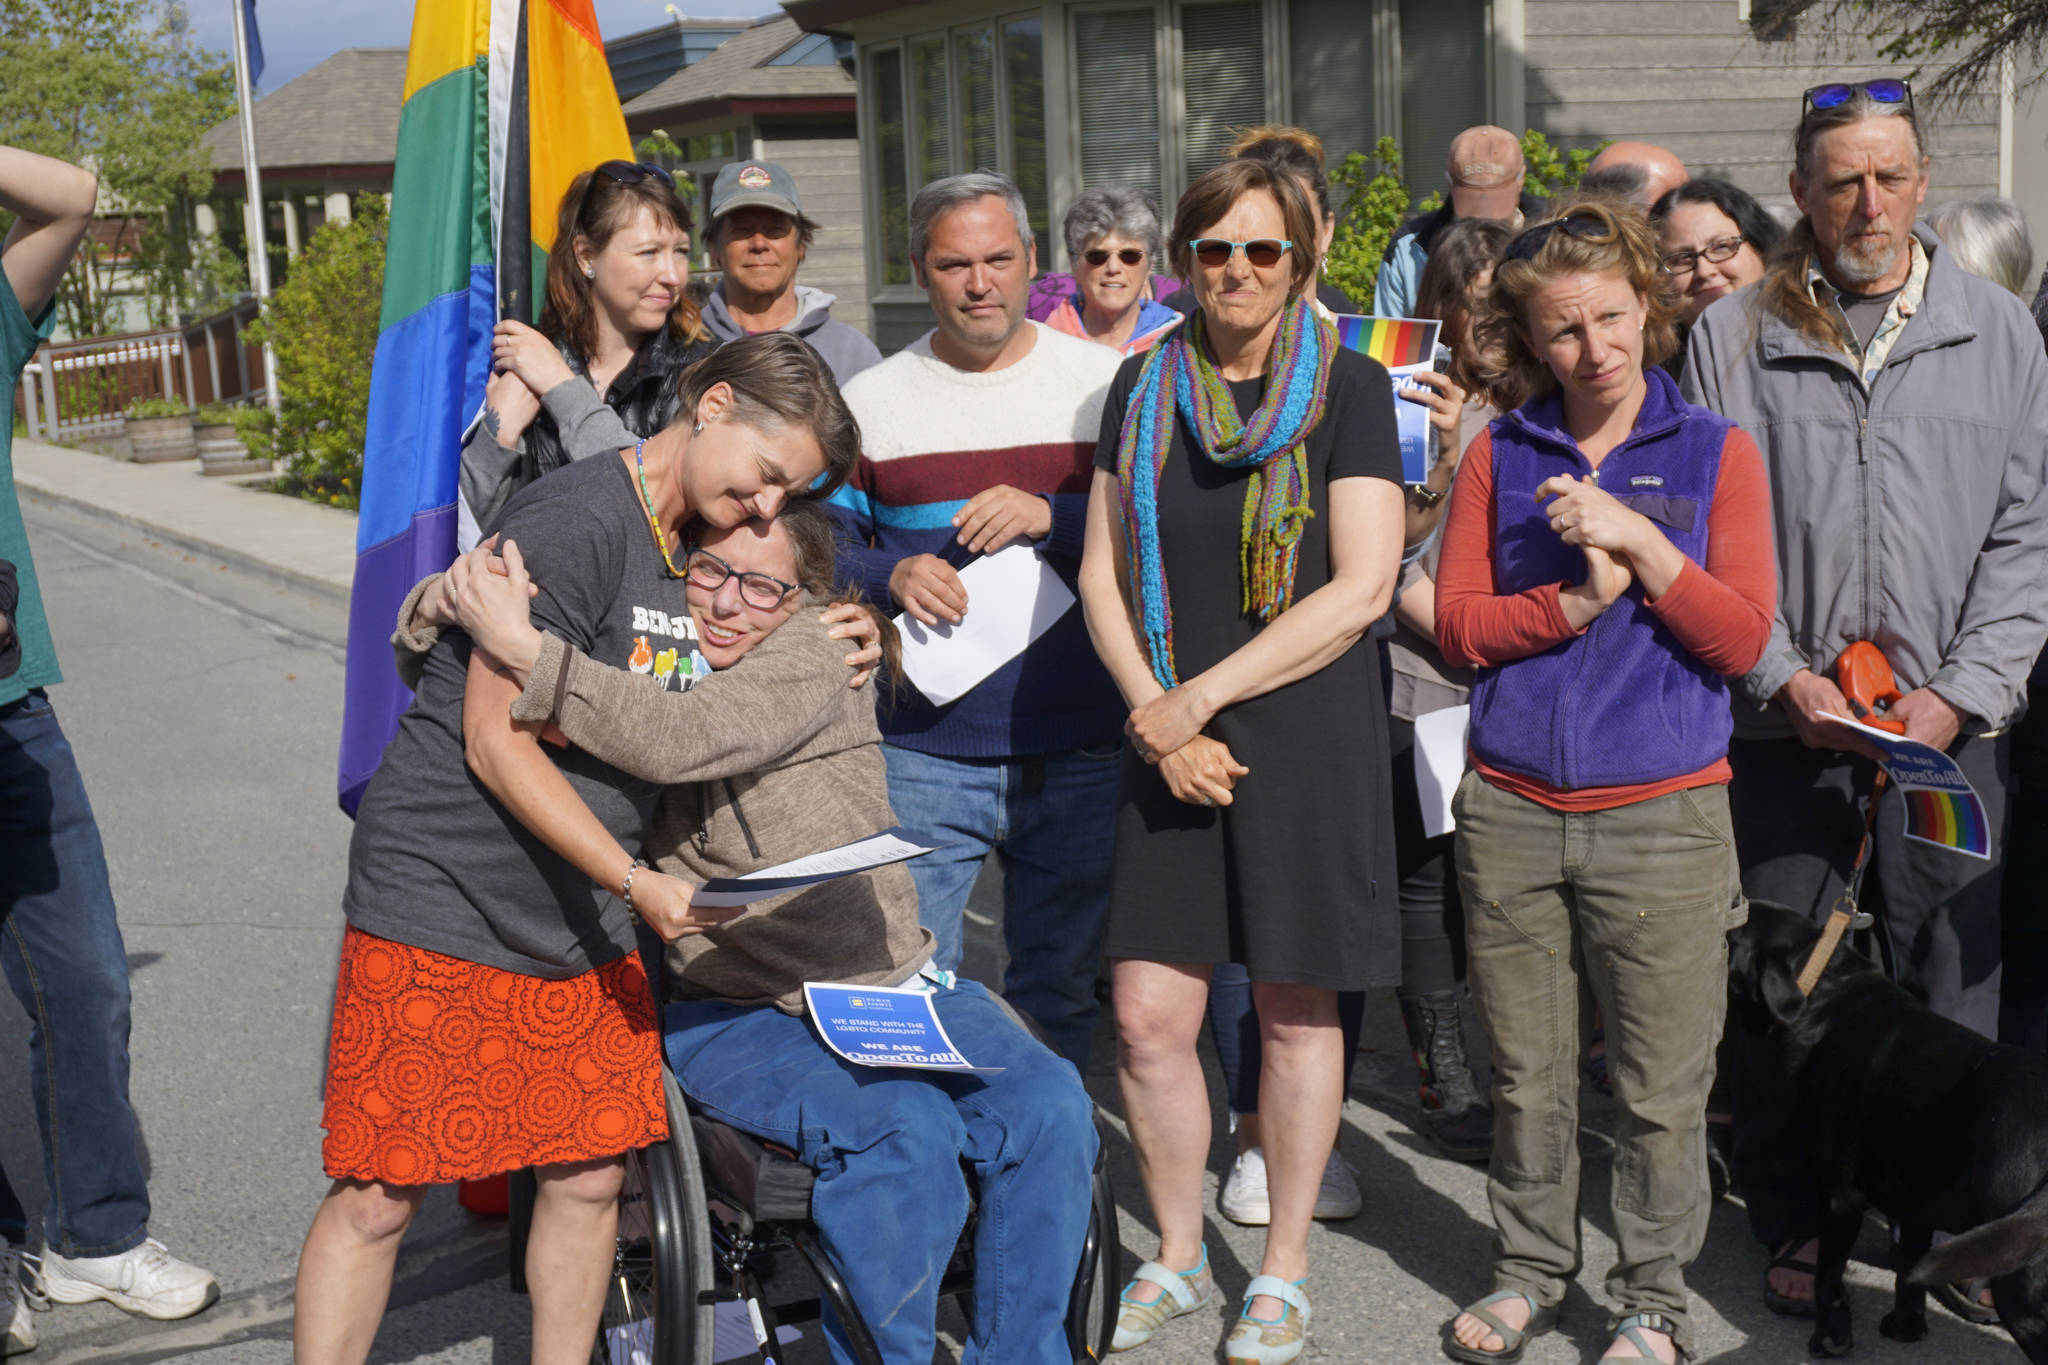 Catriona Reynolds, left, hugs Tess Dally, right, after Homer Mayor Bryan Zak read a Mayoral Recognition recognizing June as Homer Pride Month at about 6 p.m. Monday, June 11, 2018 outside Homer City Hall in Homer, Alaska. A crowd of about 75 people attended in support of Pride Month. Council members Shelly Erickson, Heath Smith and Thomas Stroozas notified the city clerk that they would not attend the June 11 meeting, forcing its cancellation because of lack of a quorum. Listening are council members Donna Aderhold, third from right, and Rachel Lord, second from right. (Photo by Michael Armstrong/Homer News)